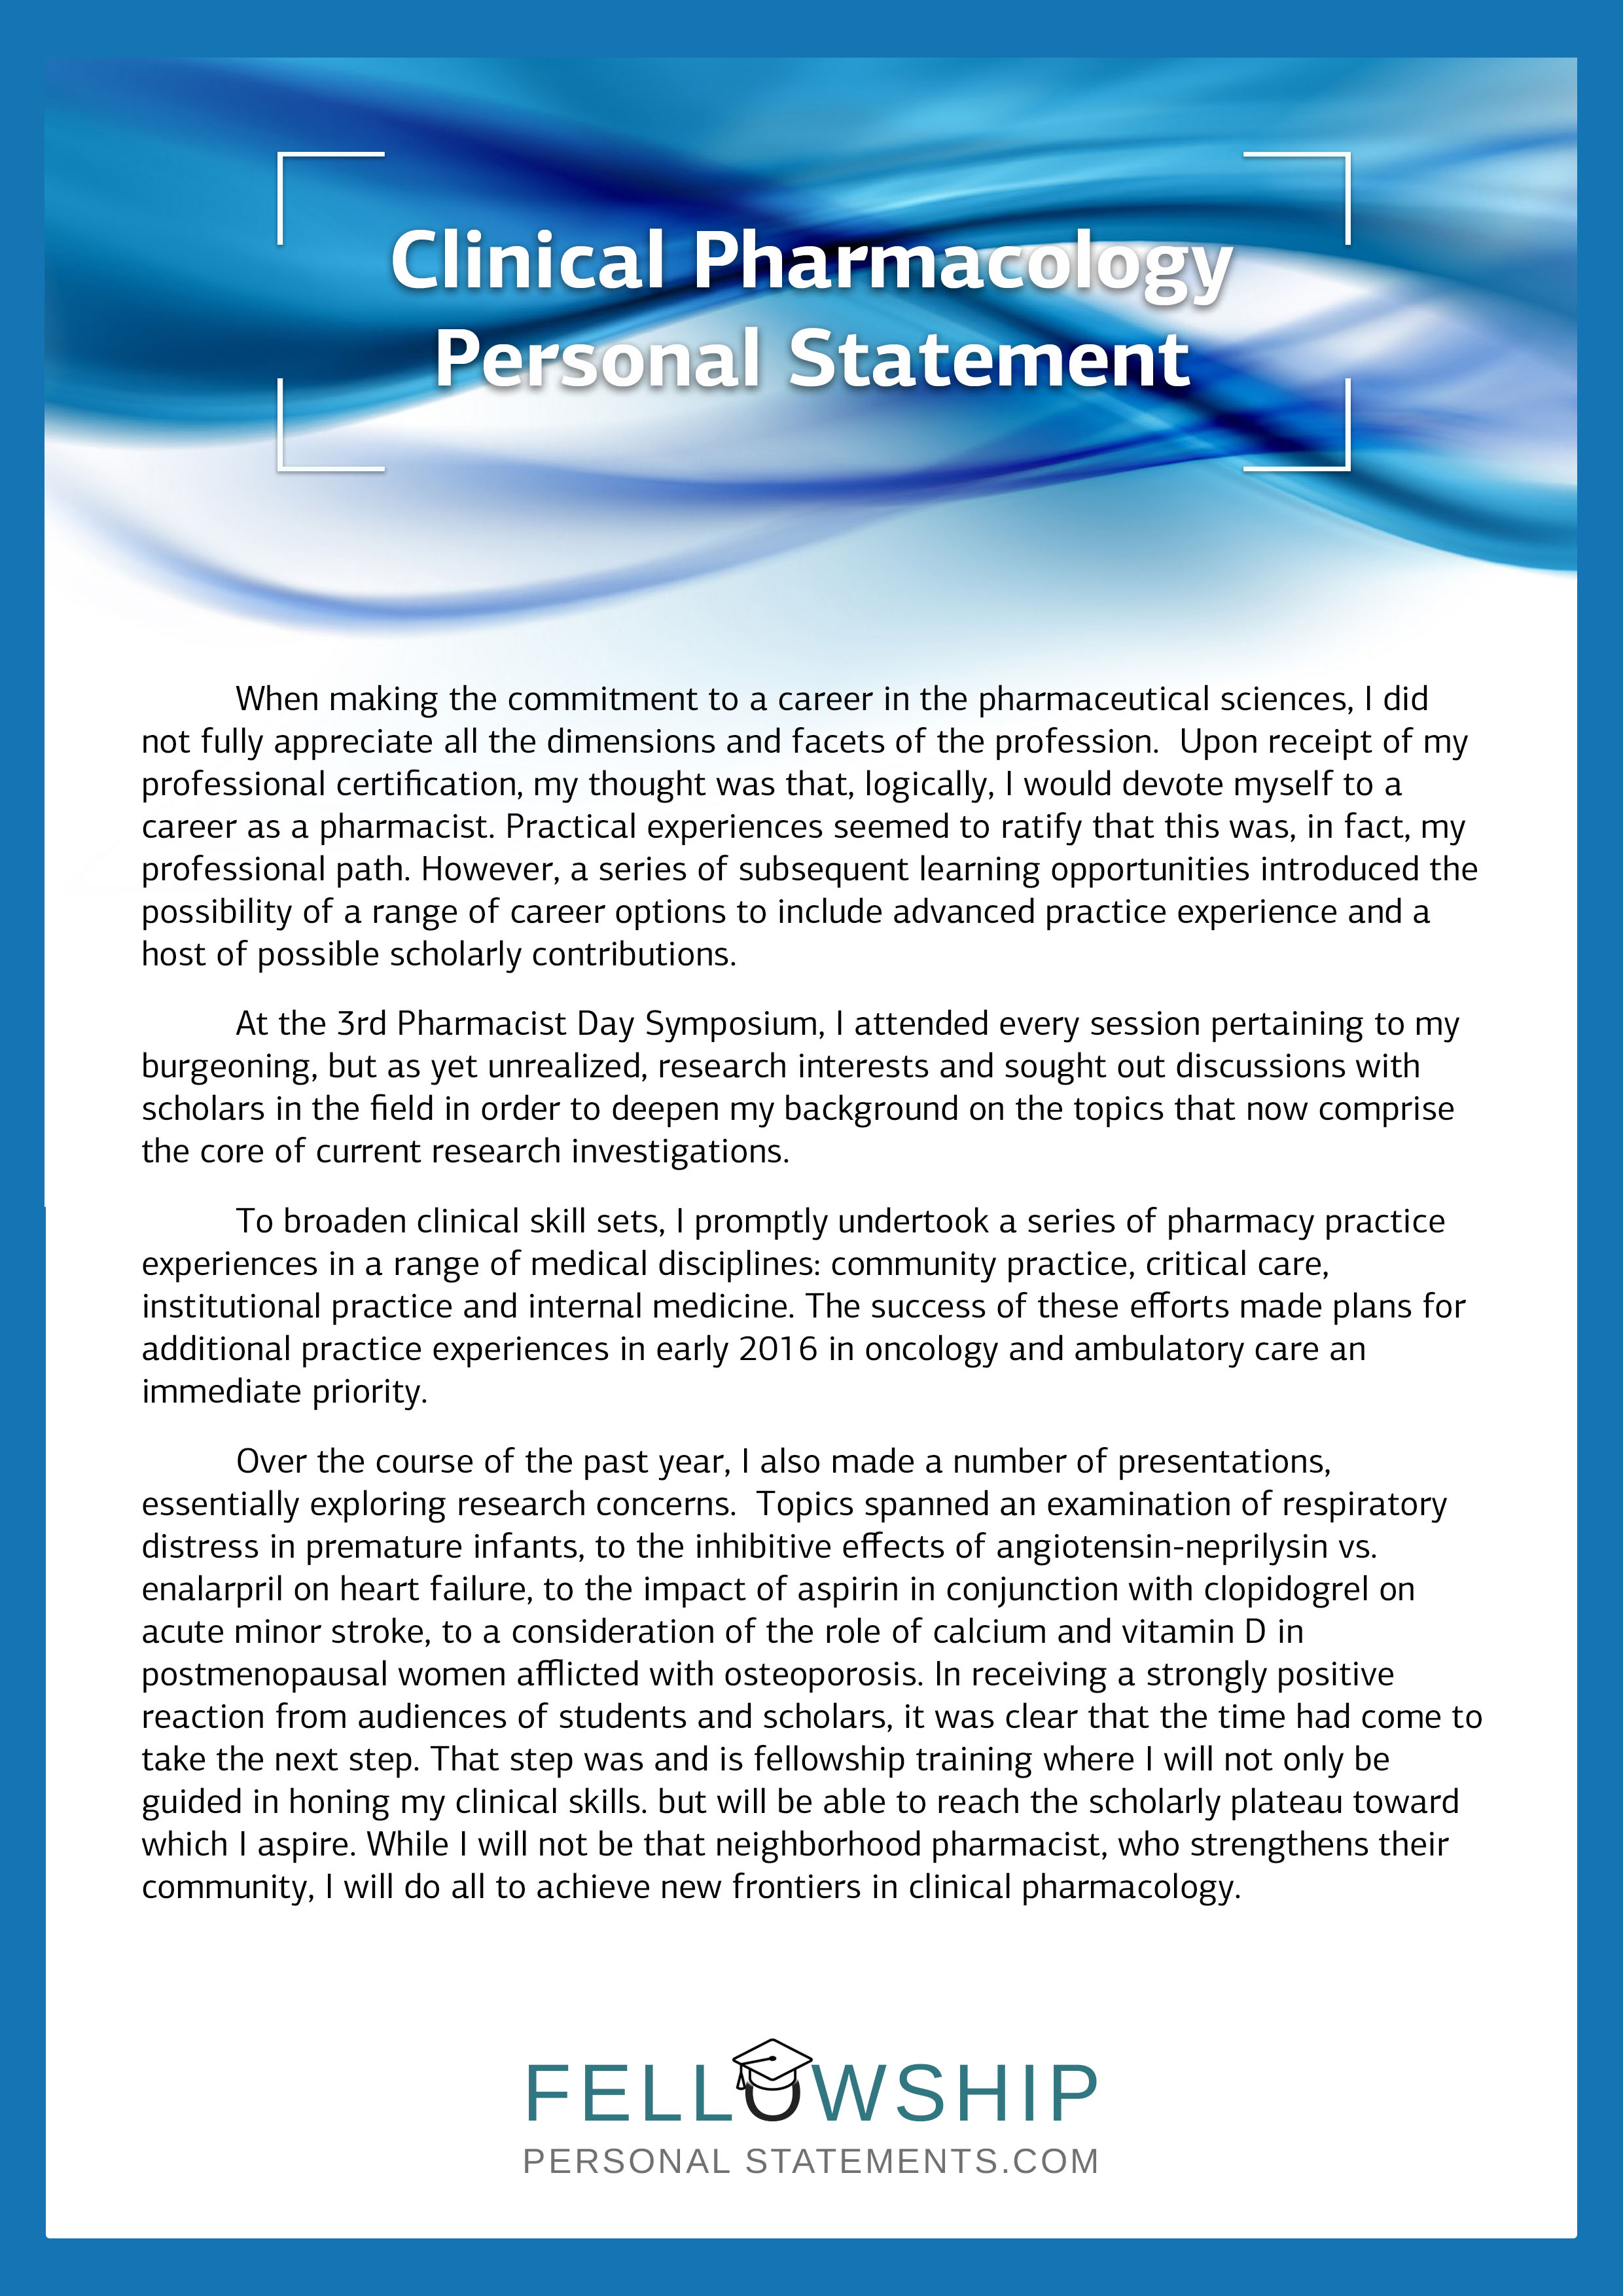 Medical fellowship personal statement